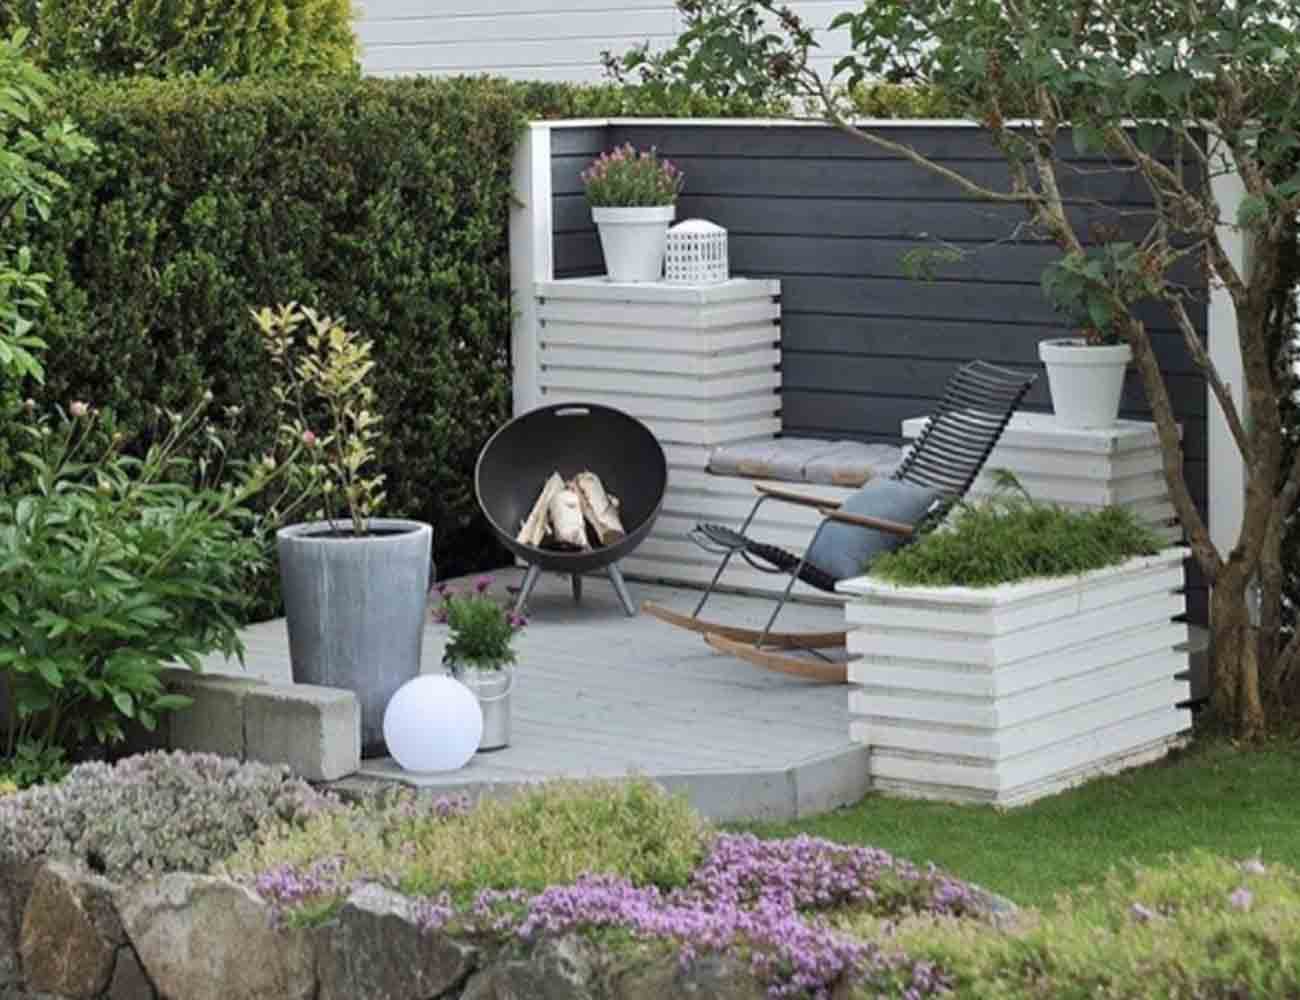 Fireglobe Fireplace by Eva Solo – Beautiful Accessory For Any Outdoor Space